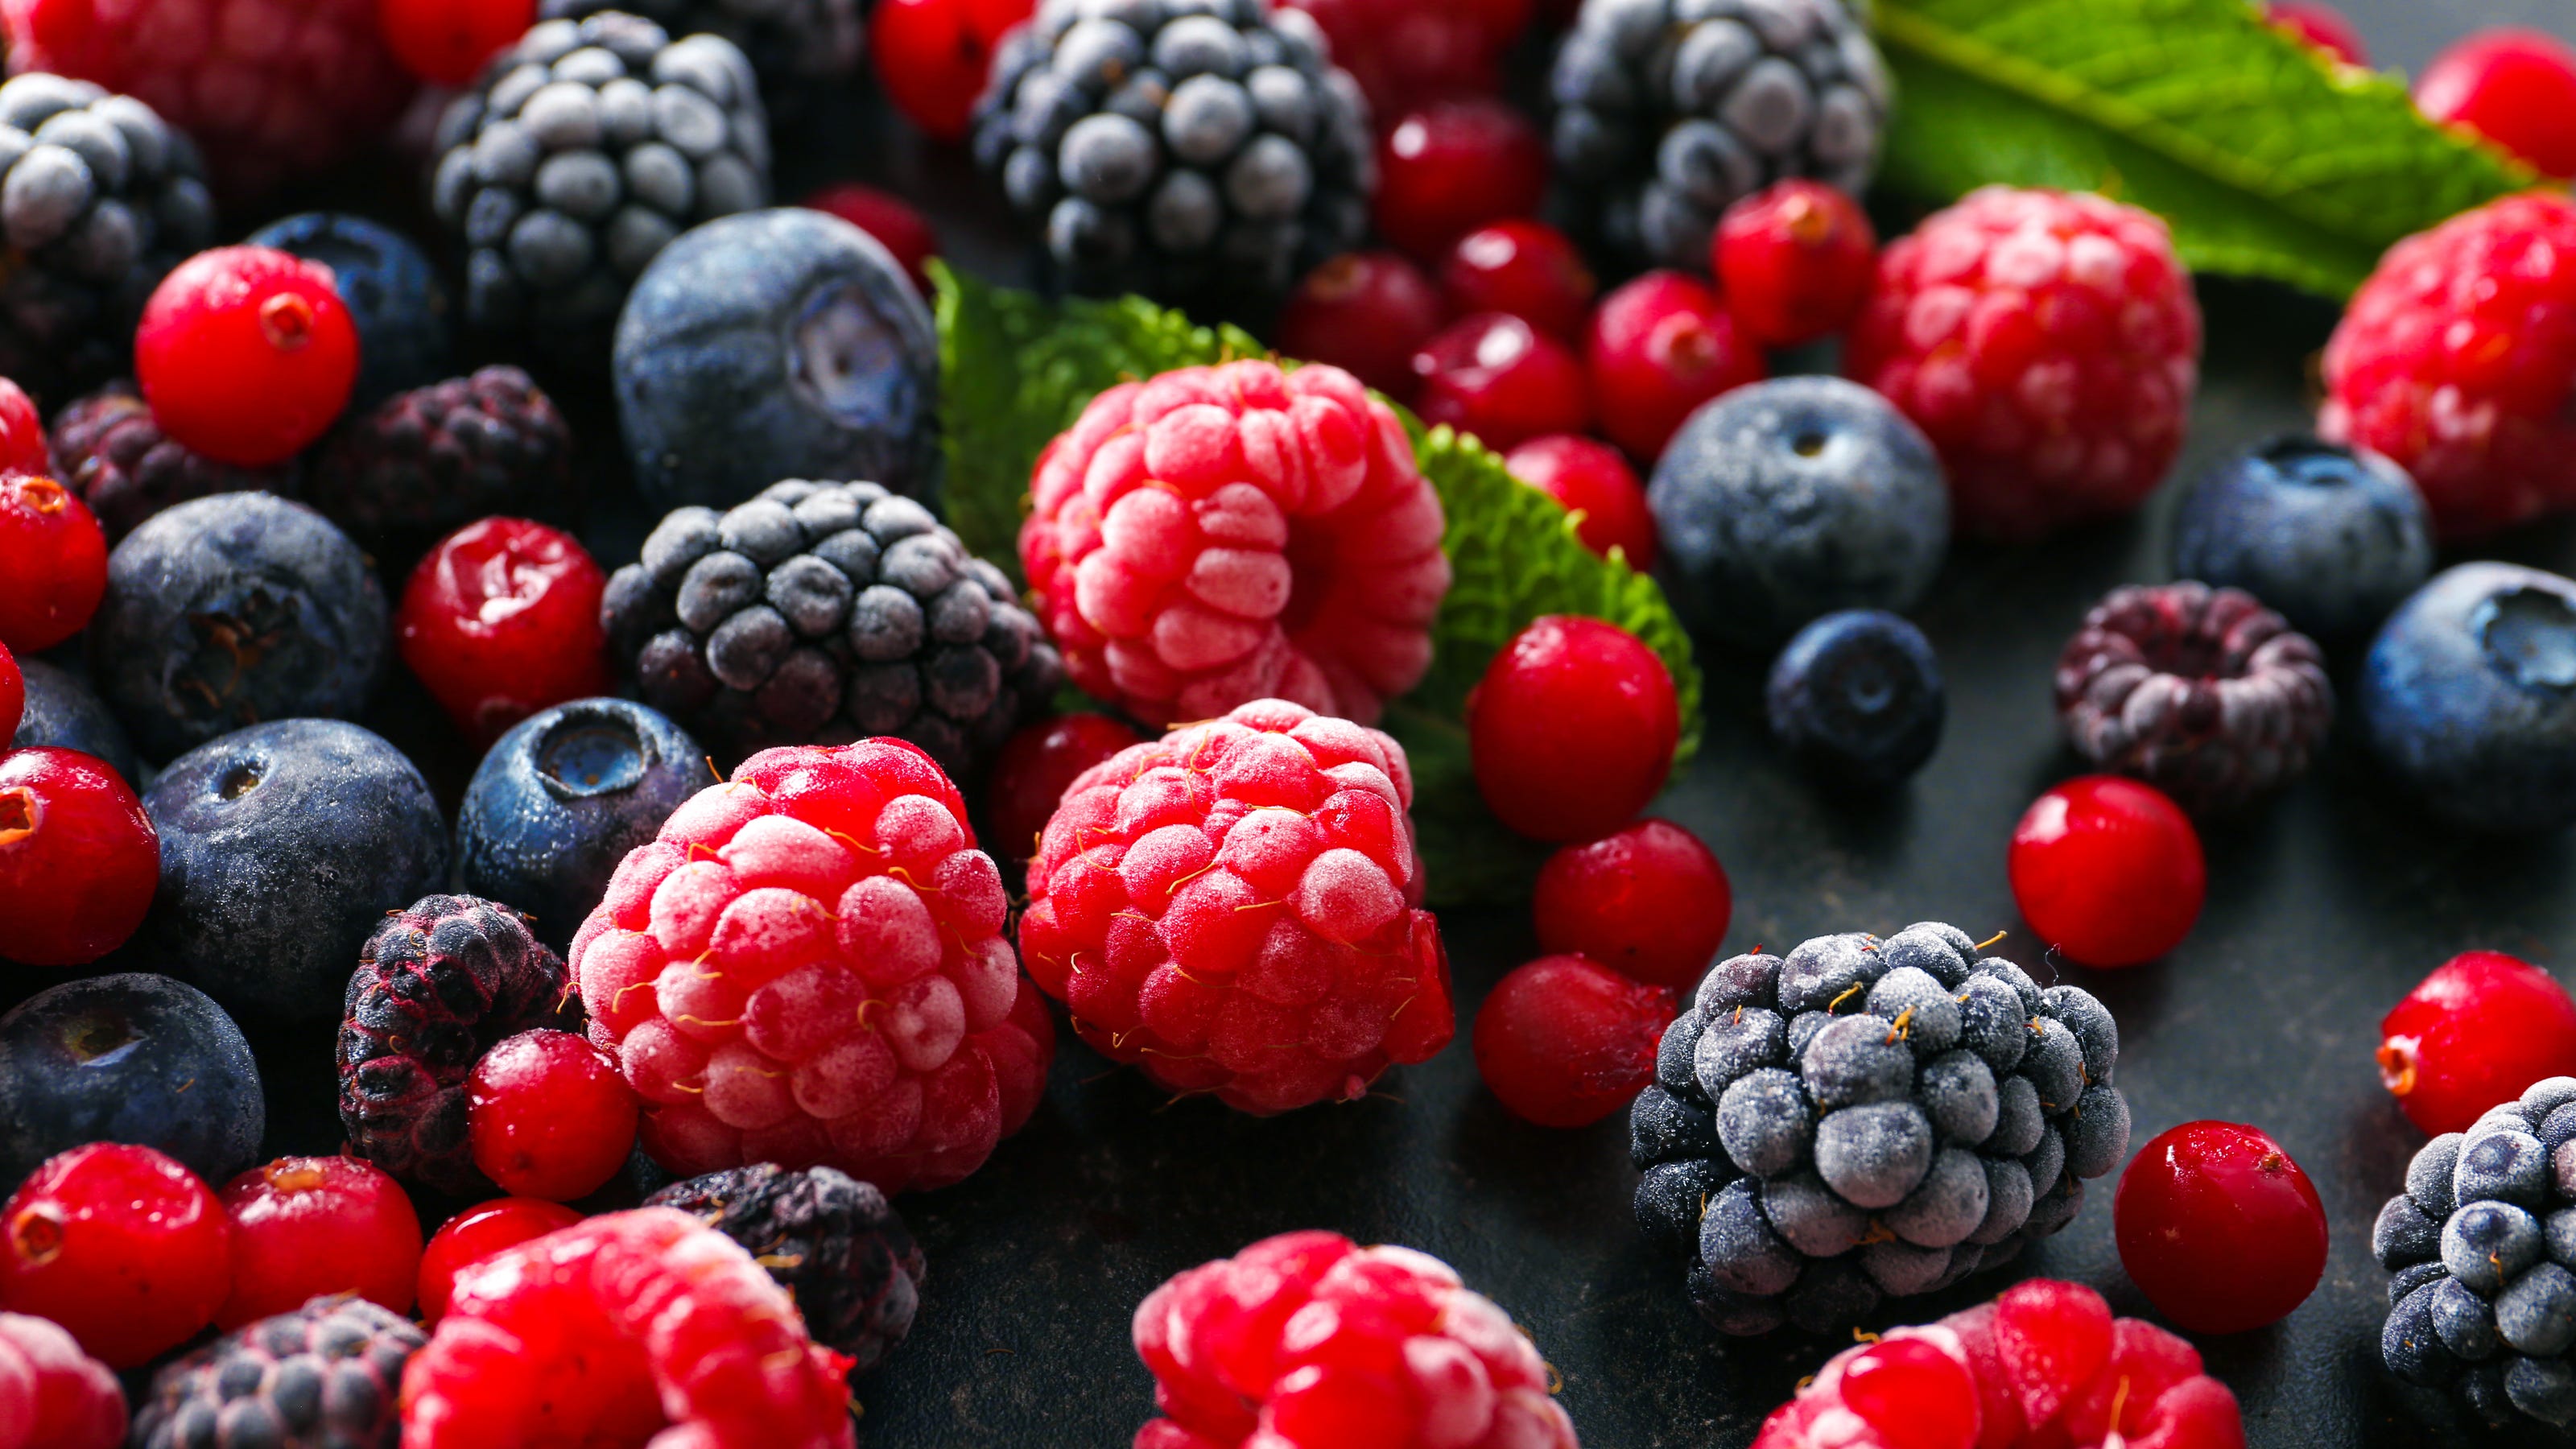 More About Best Frozen Fruits For Smoothies